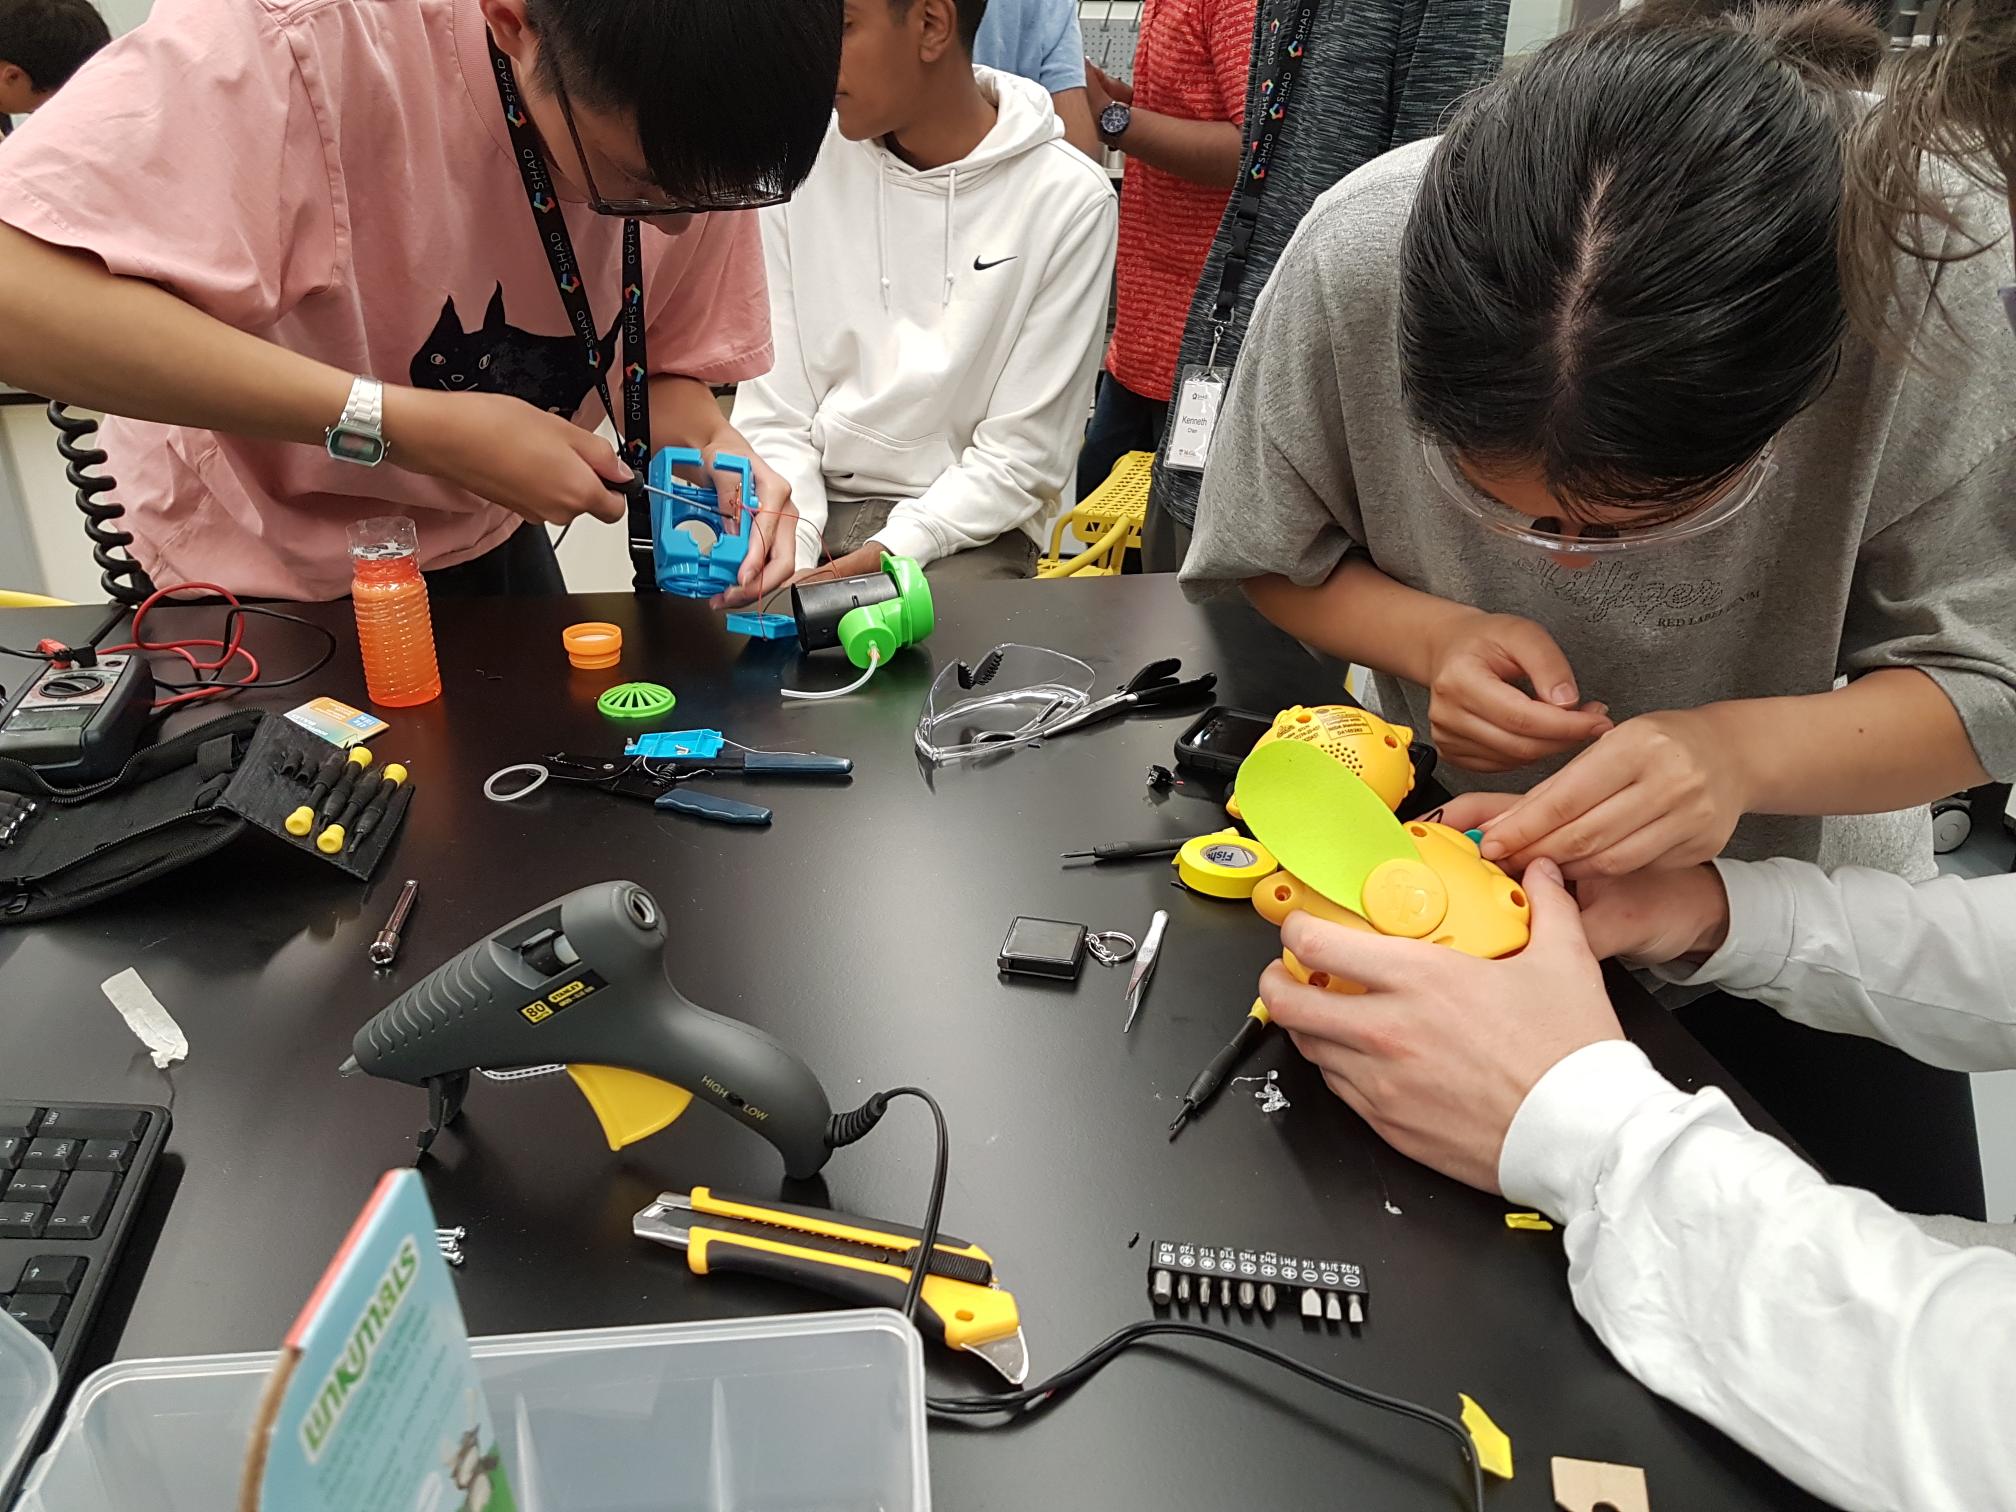 Students building devices at a build event.